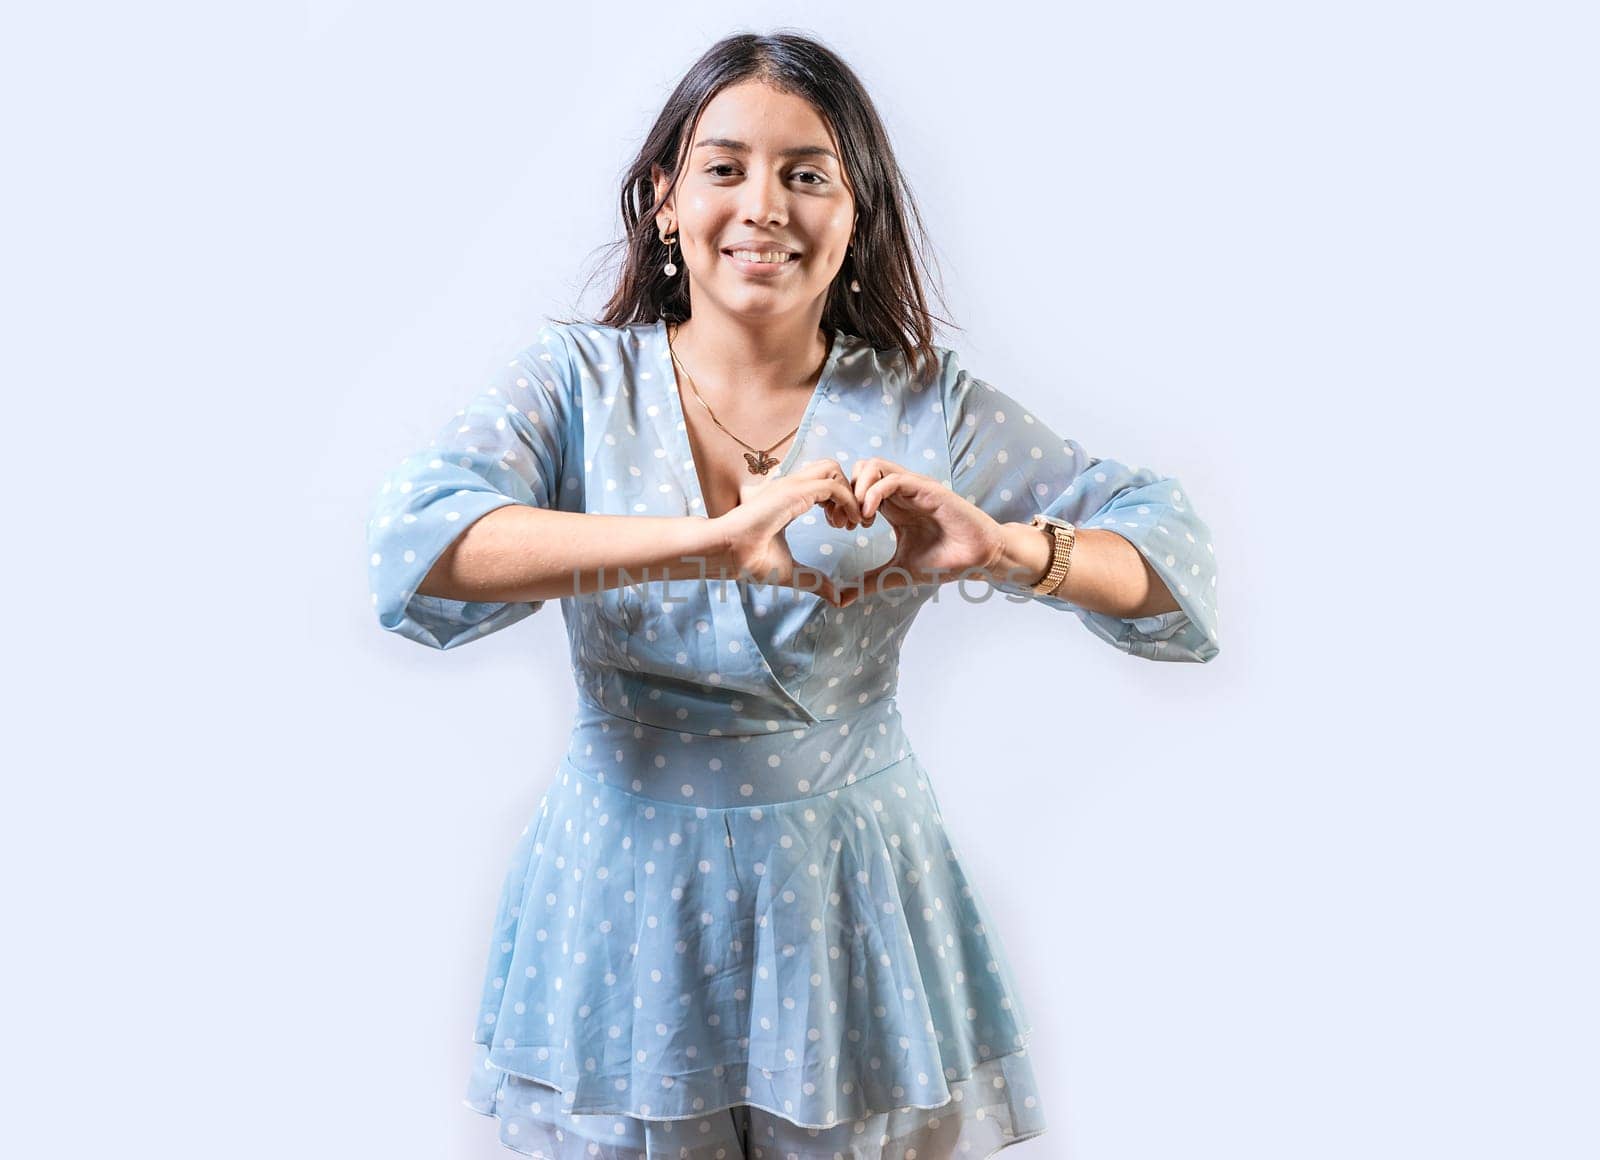 Funny young girl making heart shape with hands. Teen girl making heart shape with her hands. Happy girl making heart shape with hands isolated by isaiphoto